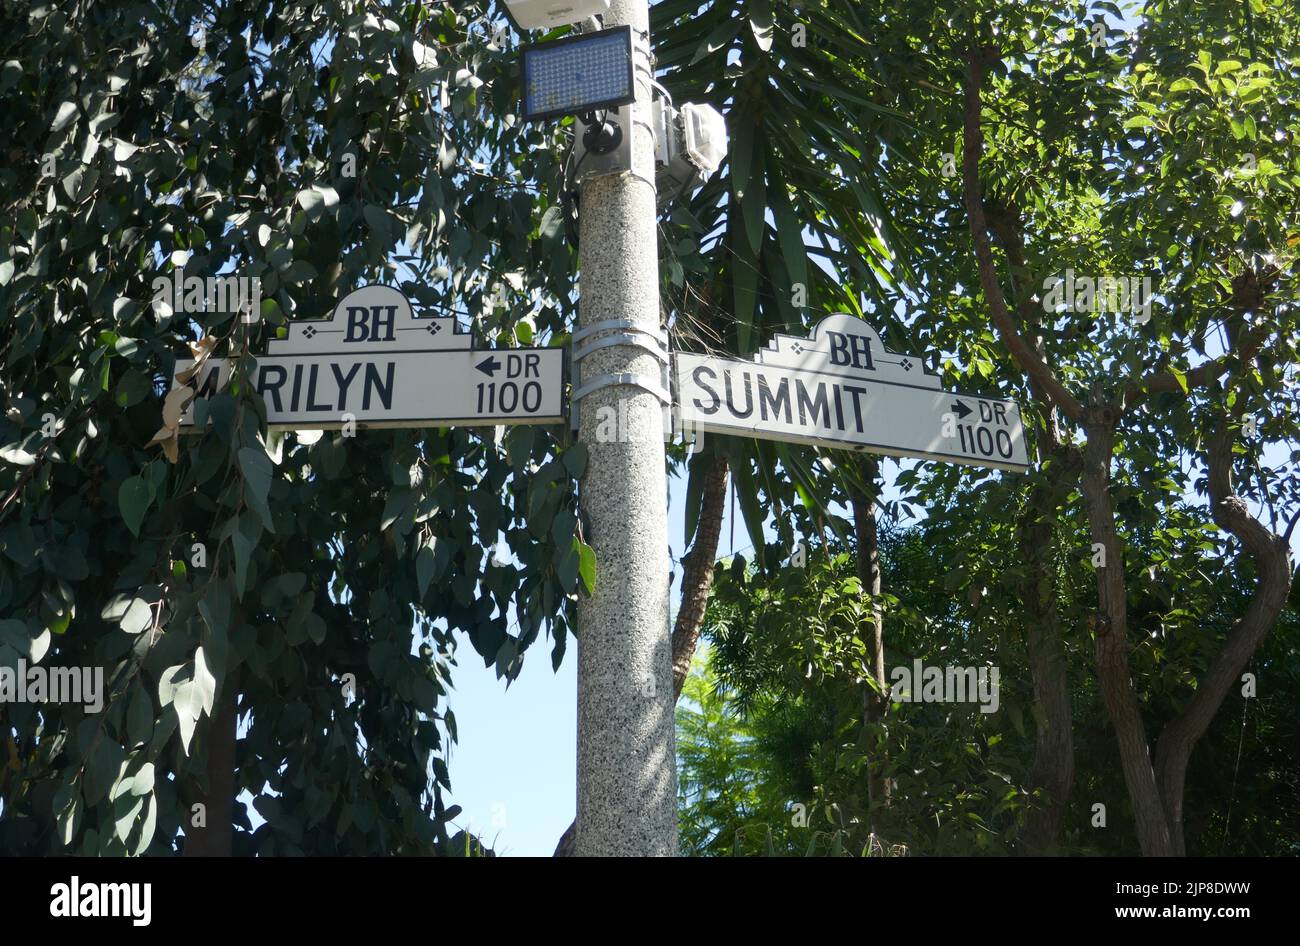 Beverly Hills, California, USA 15th August 2022 Summit Drive and Marilyn Drive on August 15, 2022 in Beverly Hills, California, USA. Photo by Barry King/Alamy Stock Photo Stock Photo